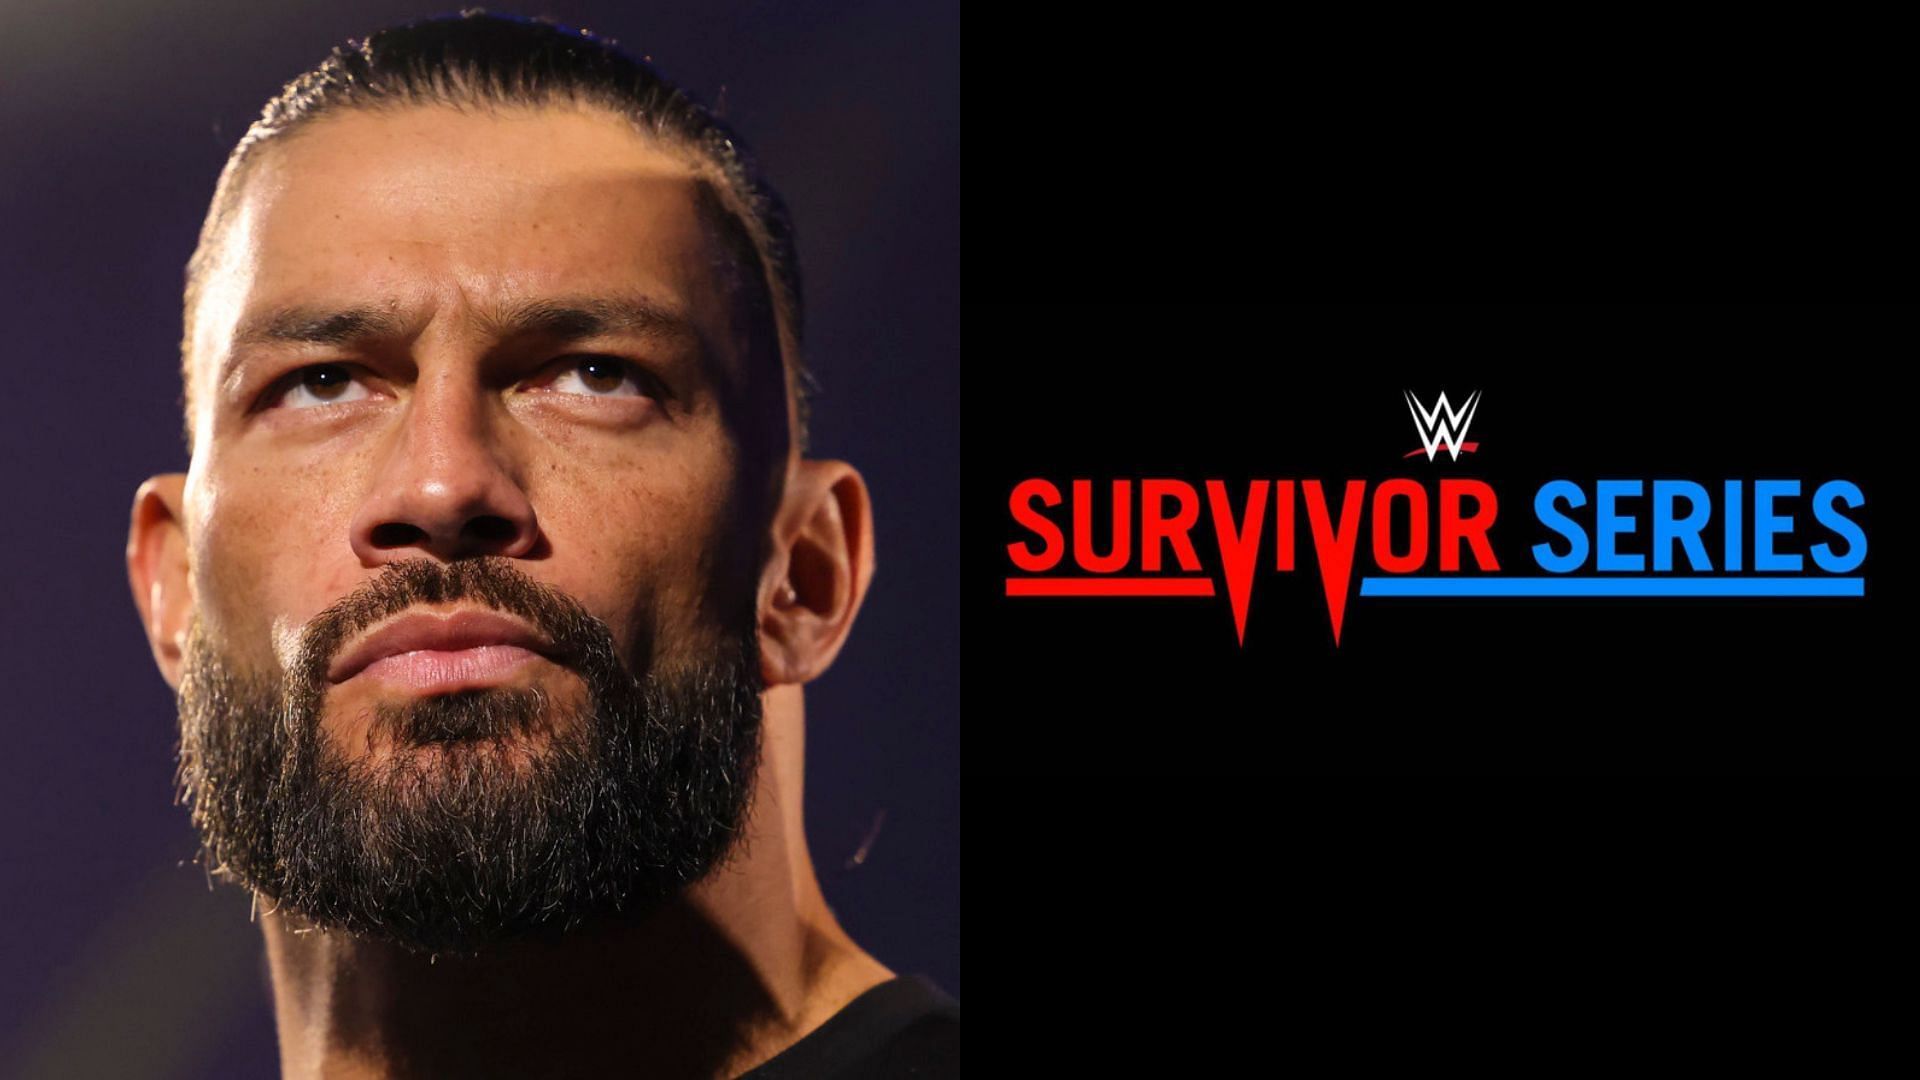 Reigns is currently not scheduled to compete at Survivor Series.